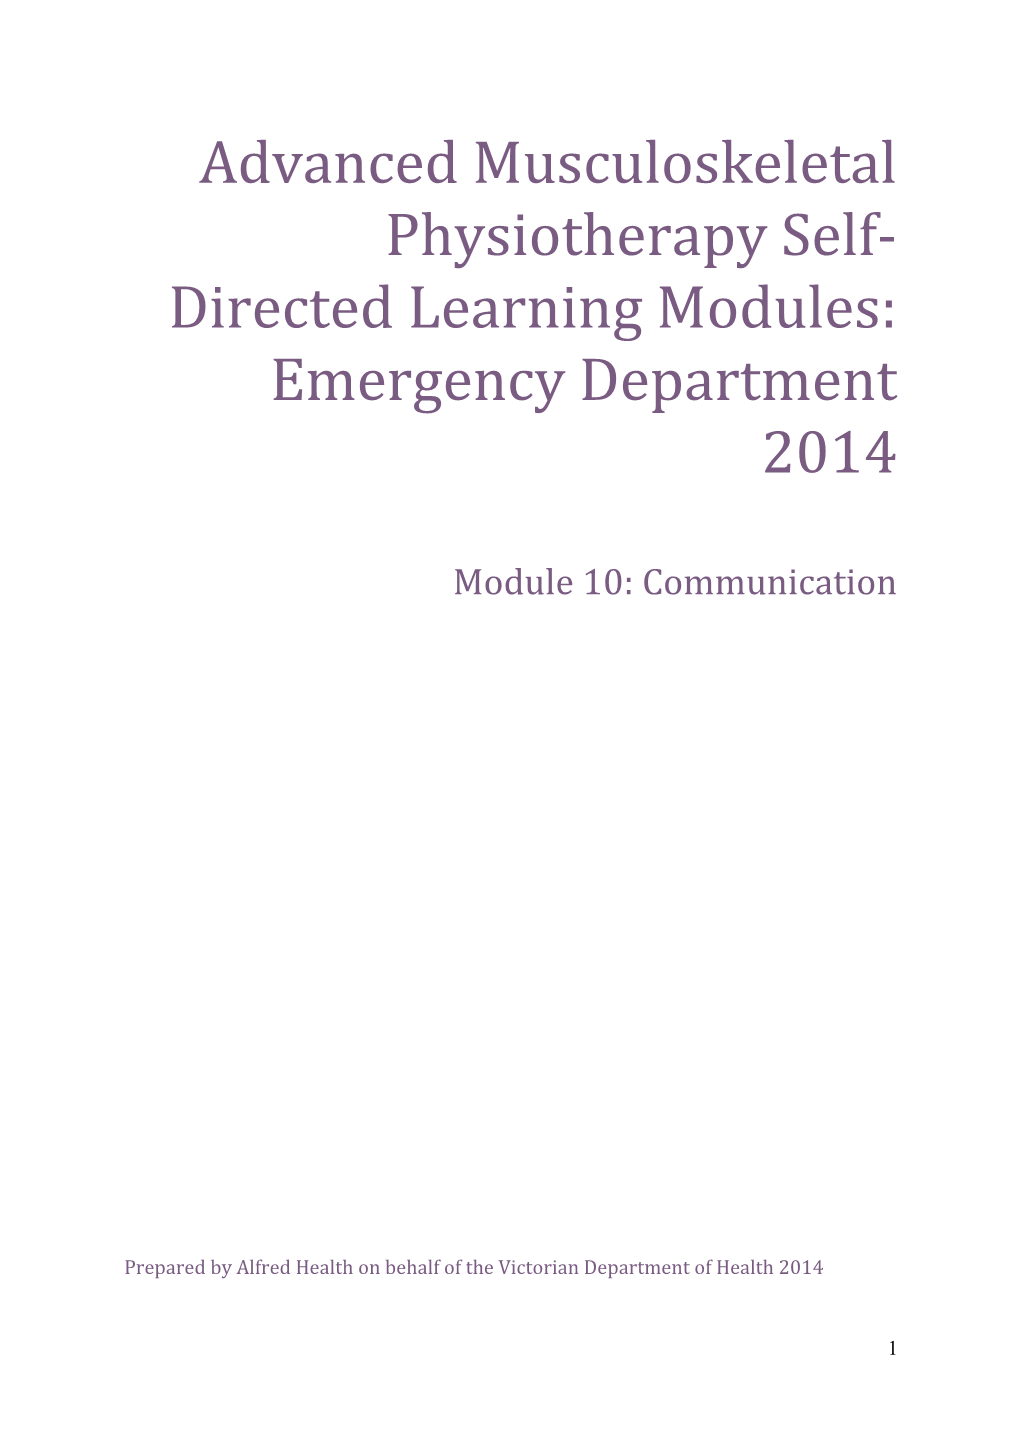 Advanced Musculoskeletal Physiotherapy Self